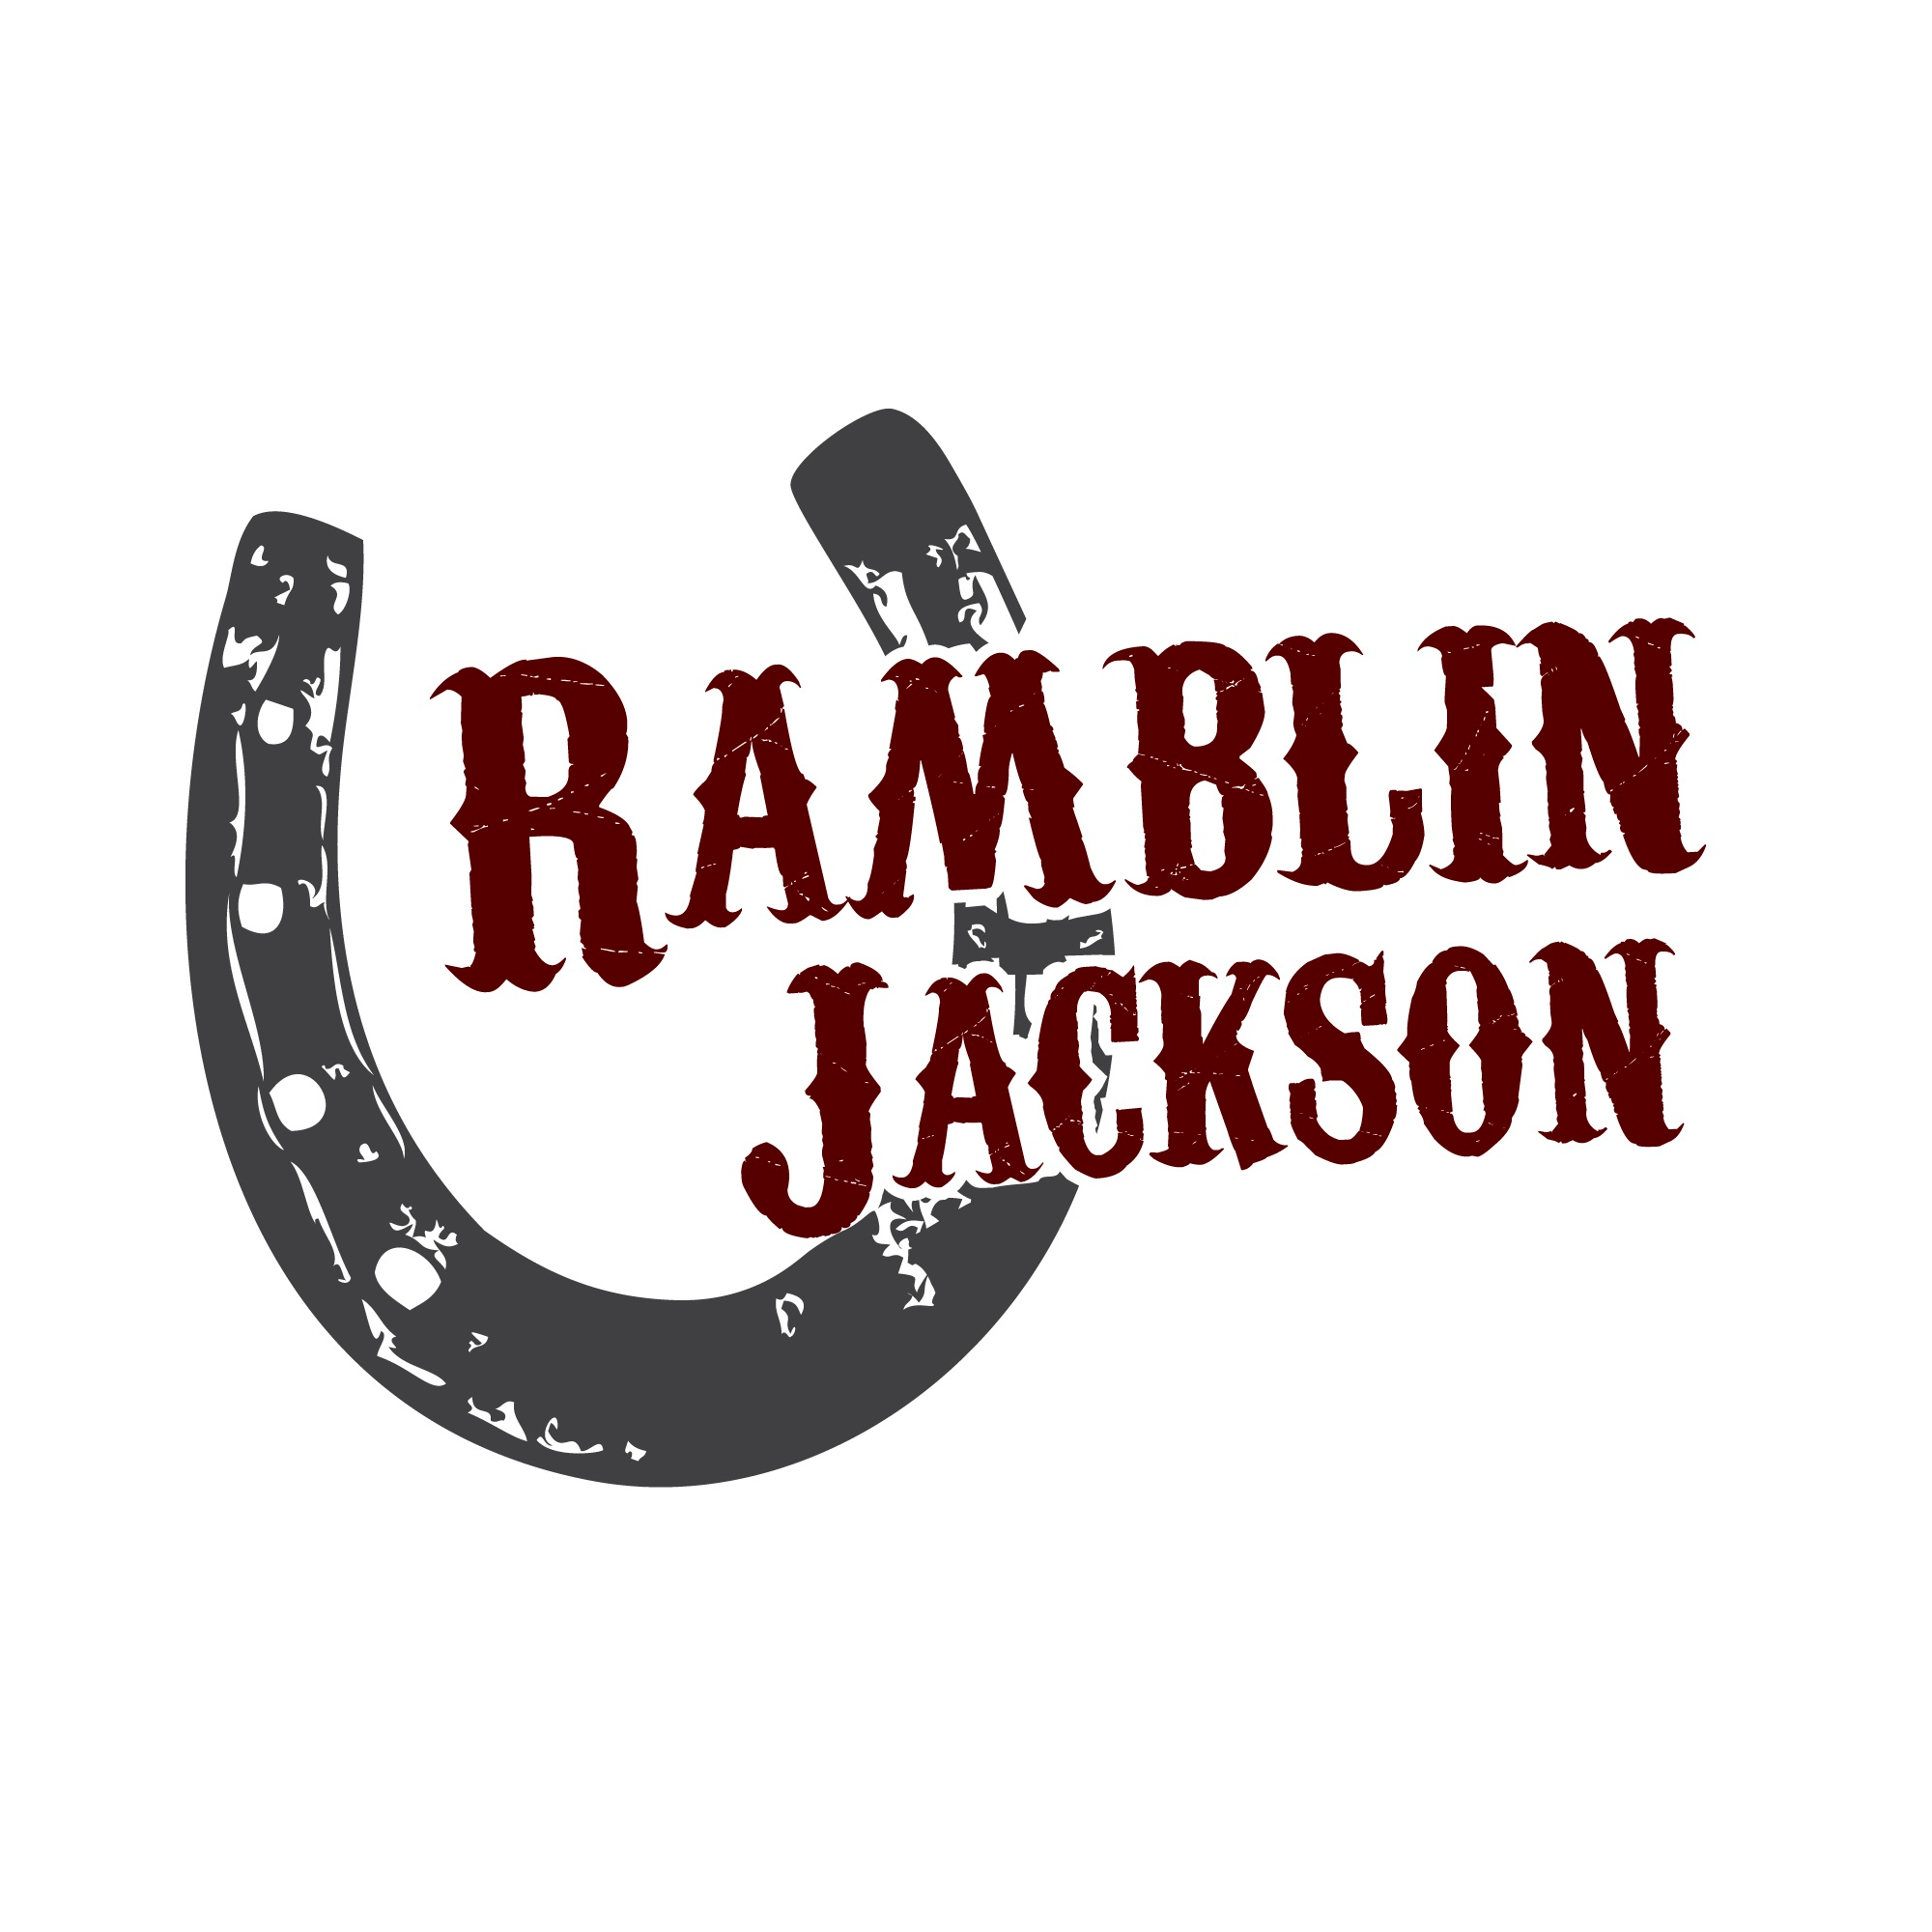 Ramblin Jackson is a digital marketing + video production agency, founded in 2009 and based in Boulder, Colorado.